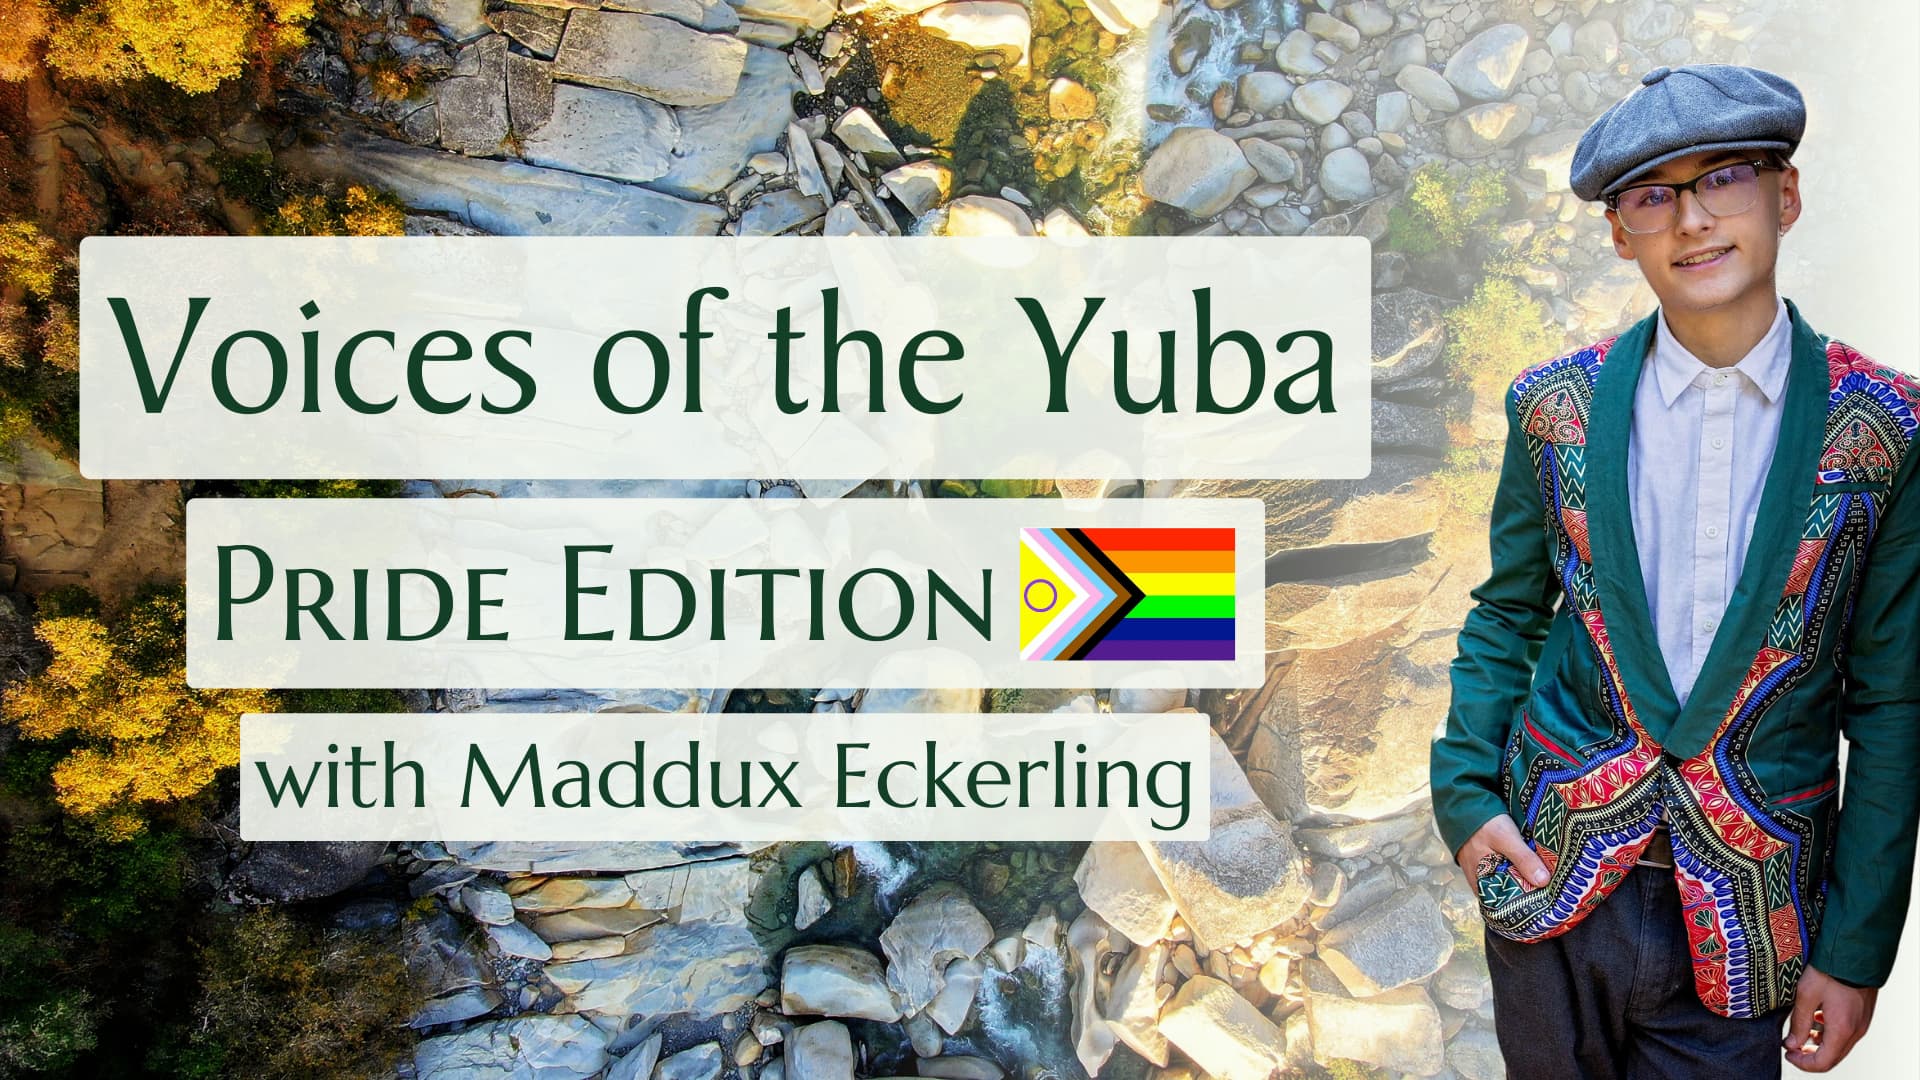 Voices of the Yuba: Pride Edition featuring Maddux Eckerling